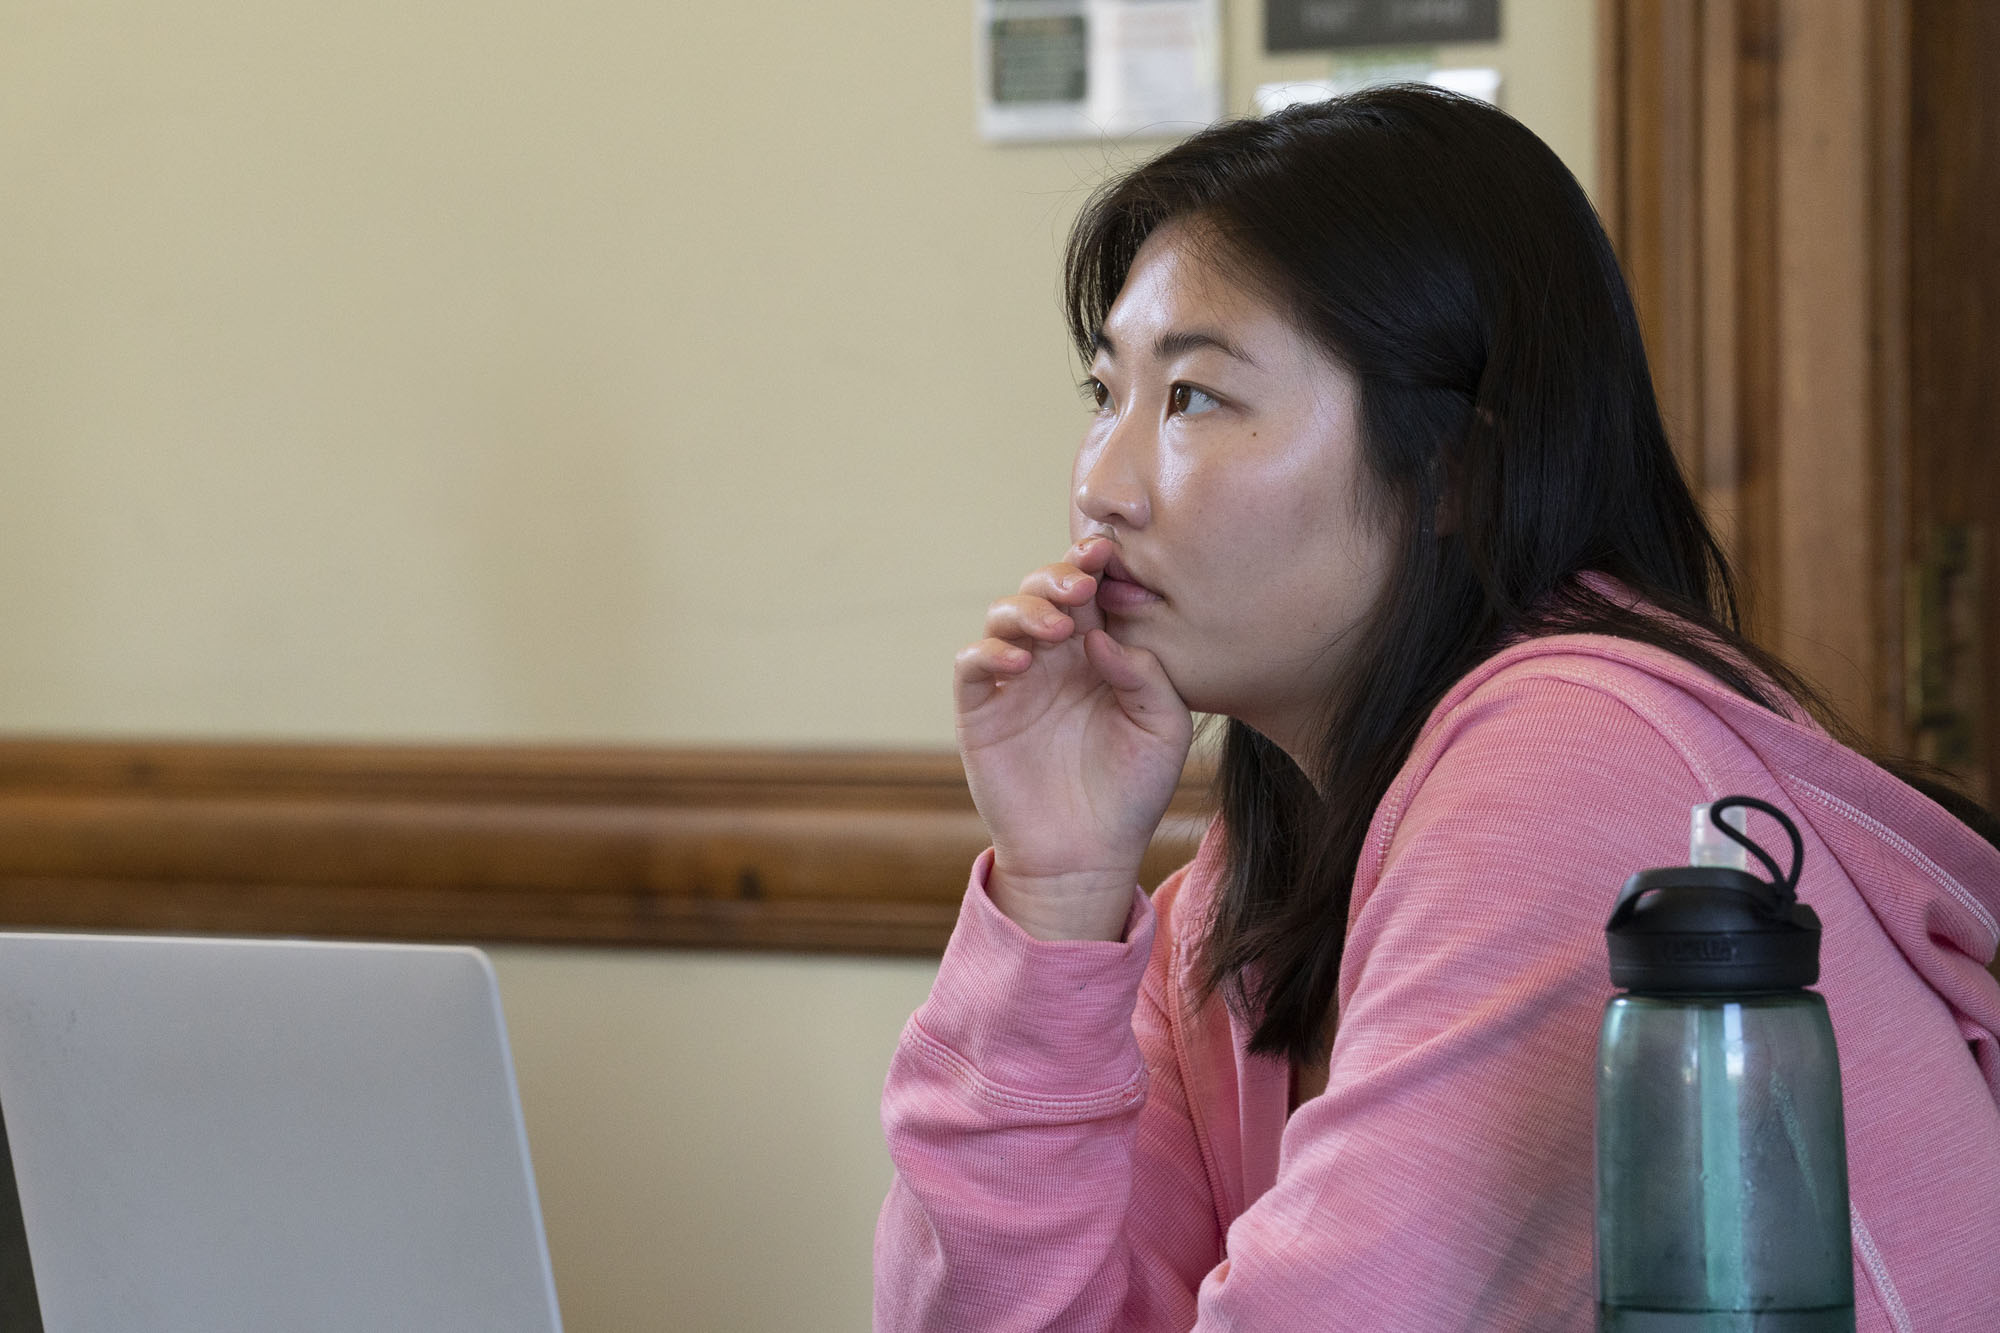 Seated at a desk, Victoria Kim looks forward over her laptop